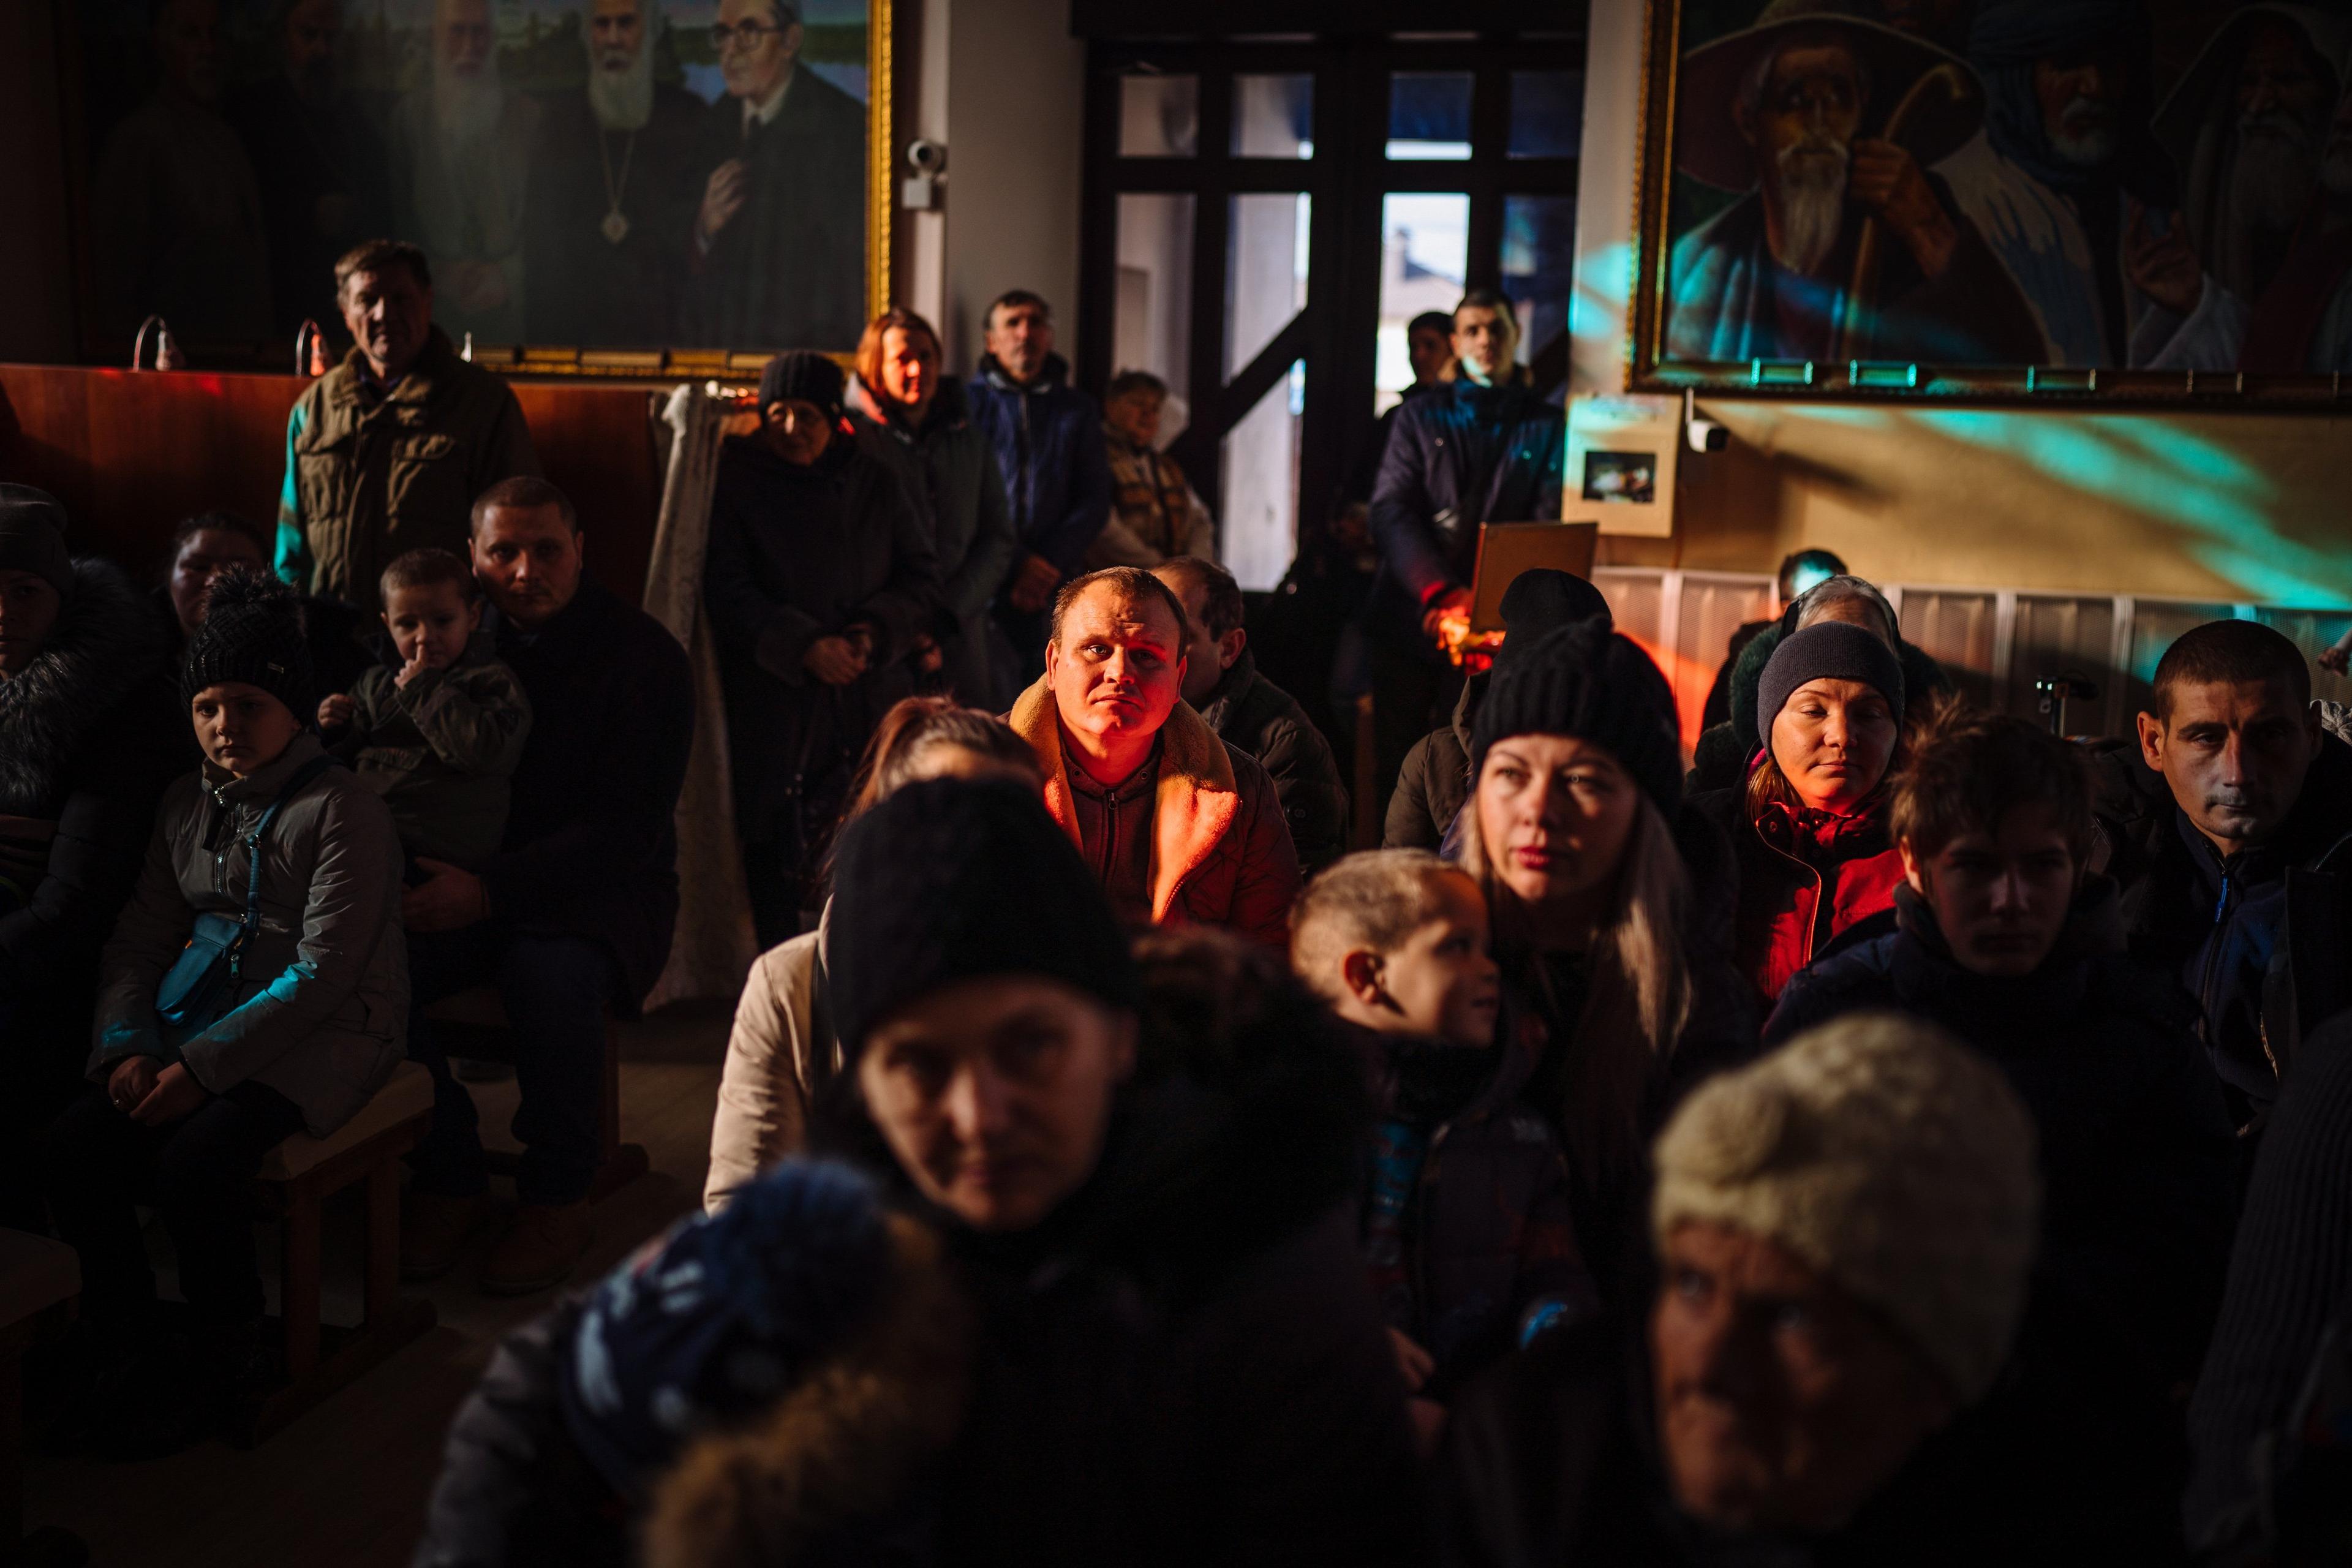 Ukrainian Orthodox Christian believers attend a St. Mykola (St. Nicolas) mass in a church in Kherson, on December 19, 2022, amid the Russian invasion of Ukraine. (Photo by Dimitar DILKOFF / AFP)